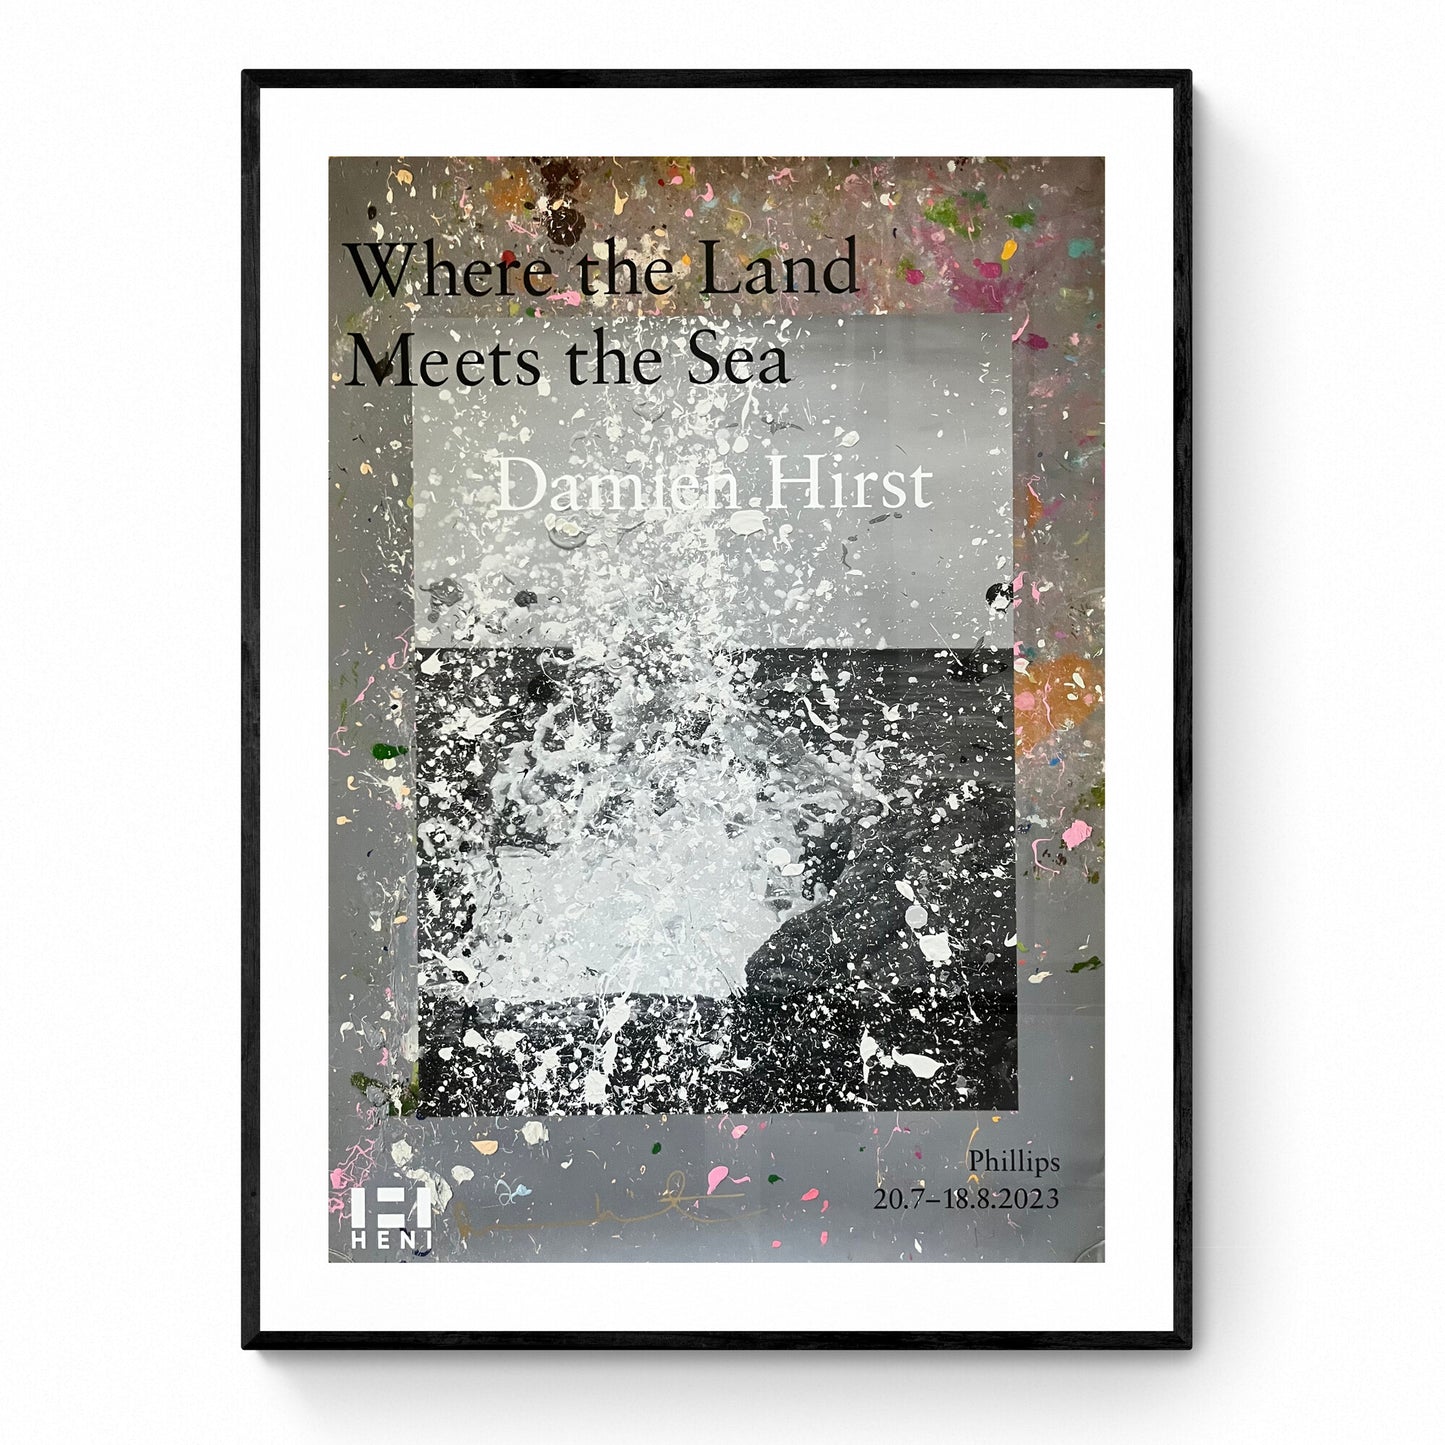 Damien Hirst, handsignierte Lithographie „When the Land Meets the Sea“